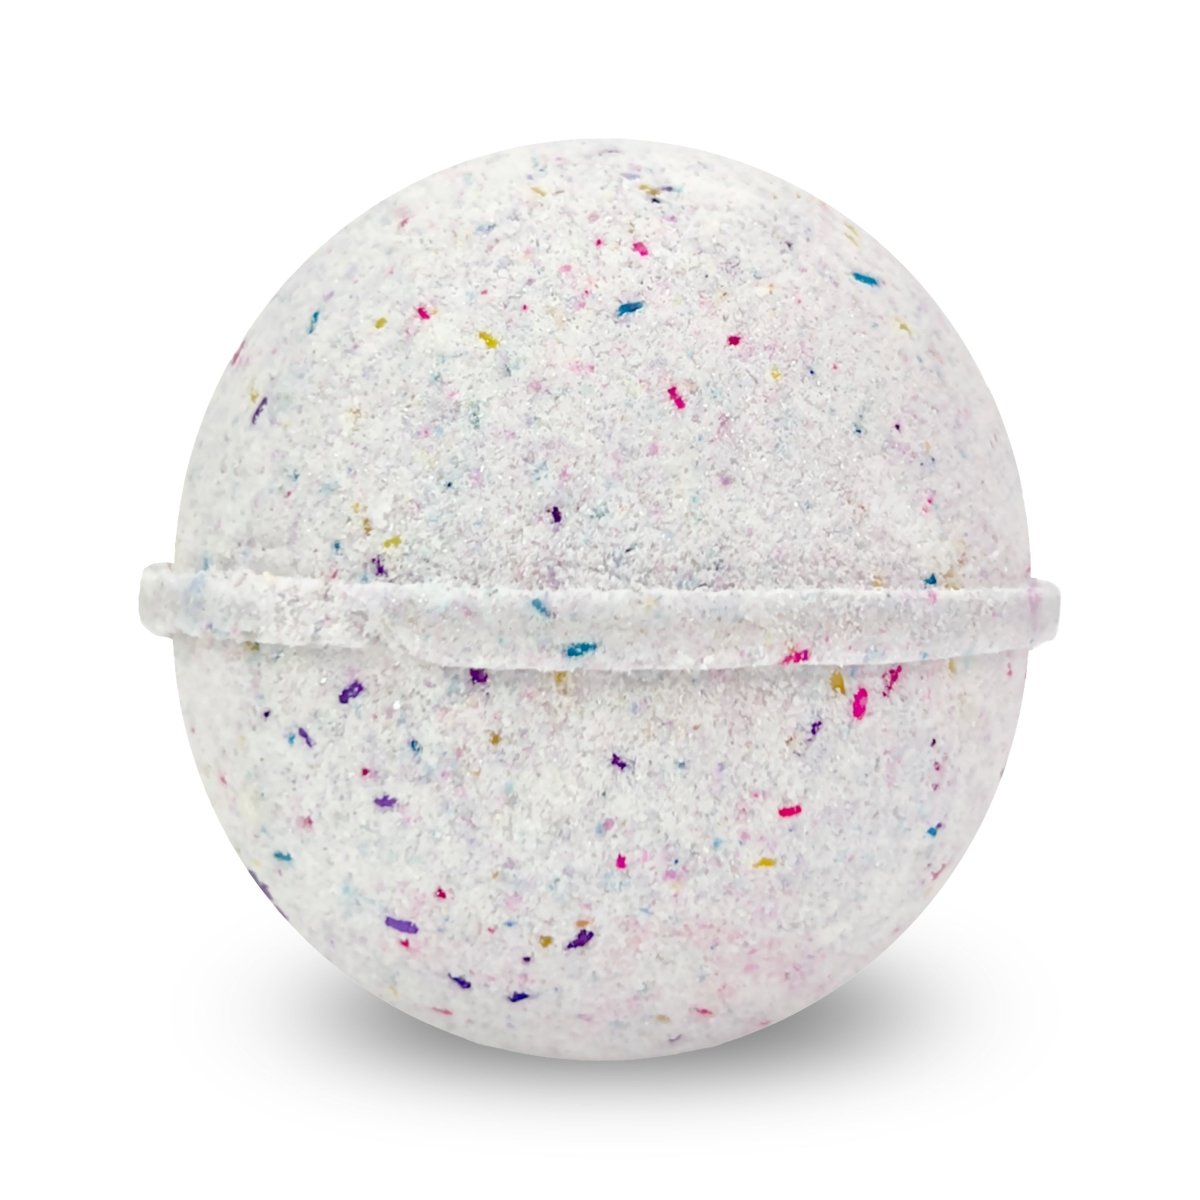 Hip Hip Hooray Bath Bomb for Kids & Adults - Large Colourful Glitters Birthday Cake Fragrance - Made in Australia by Bath Box